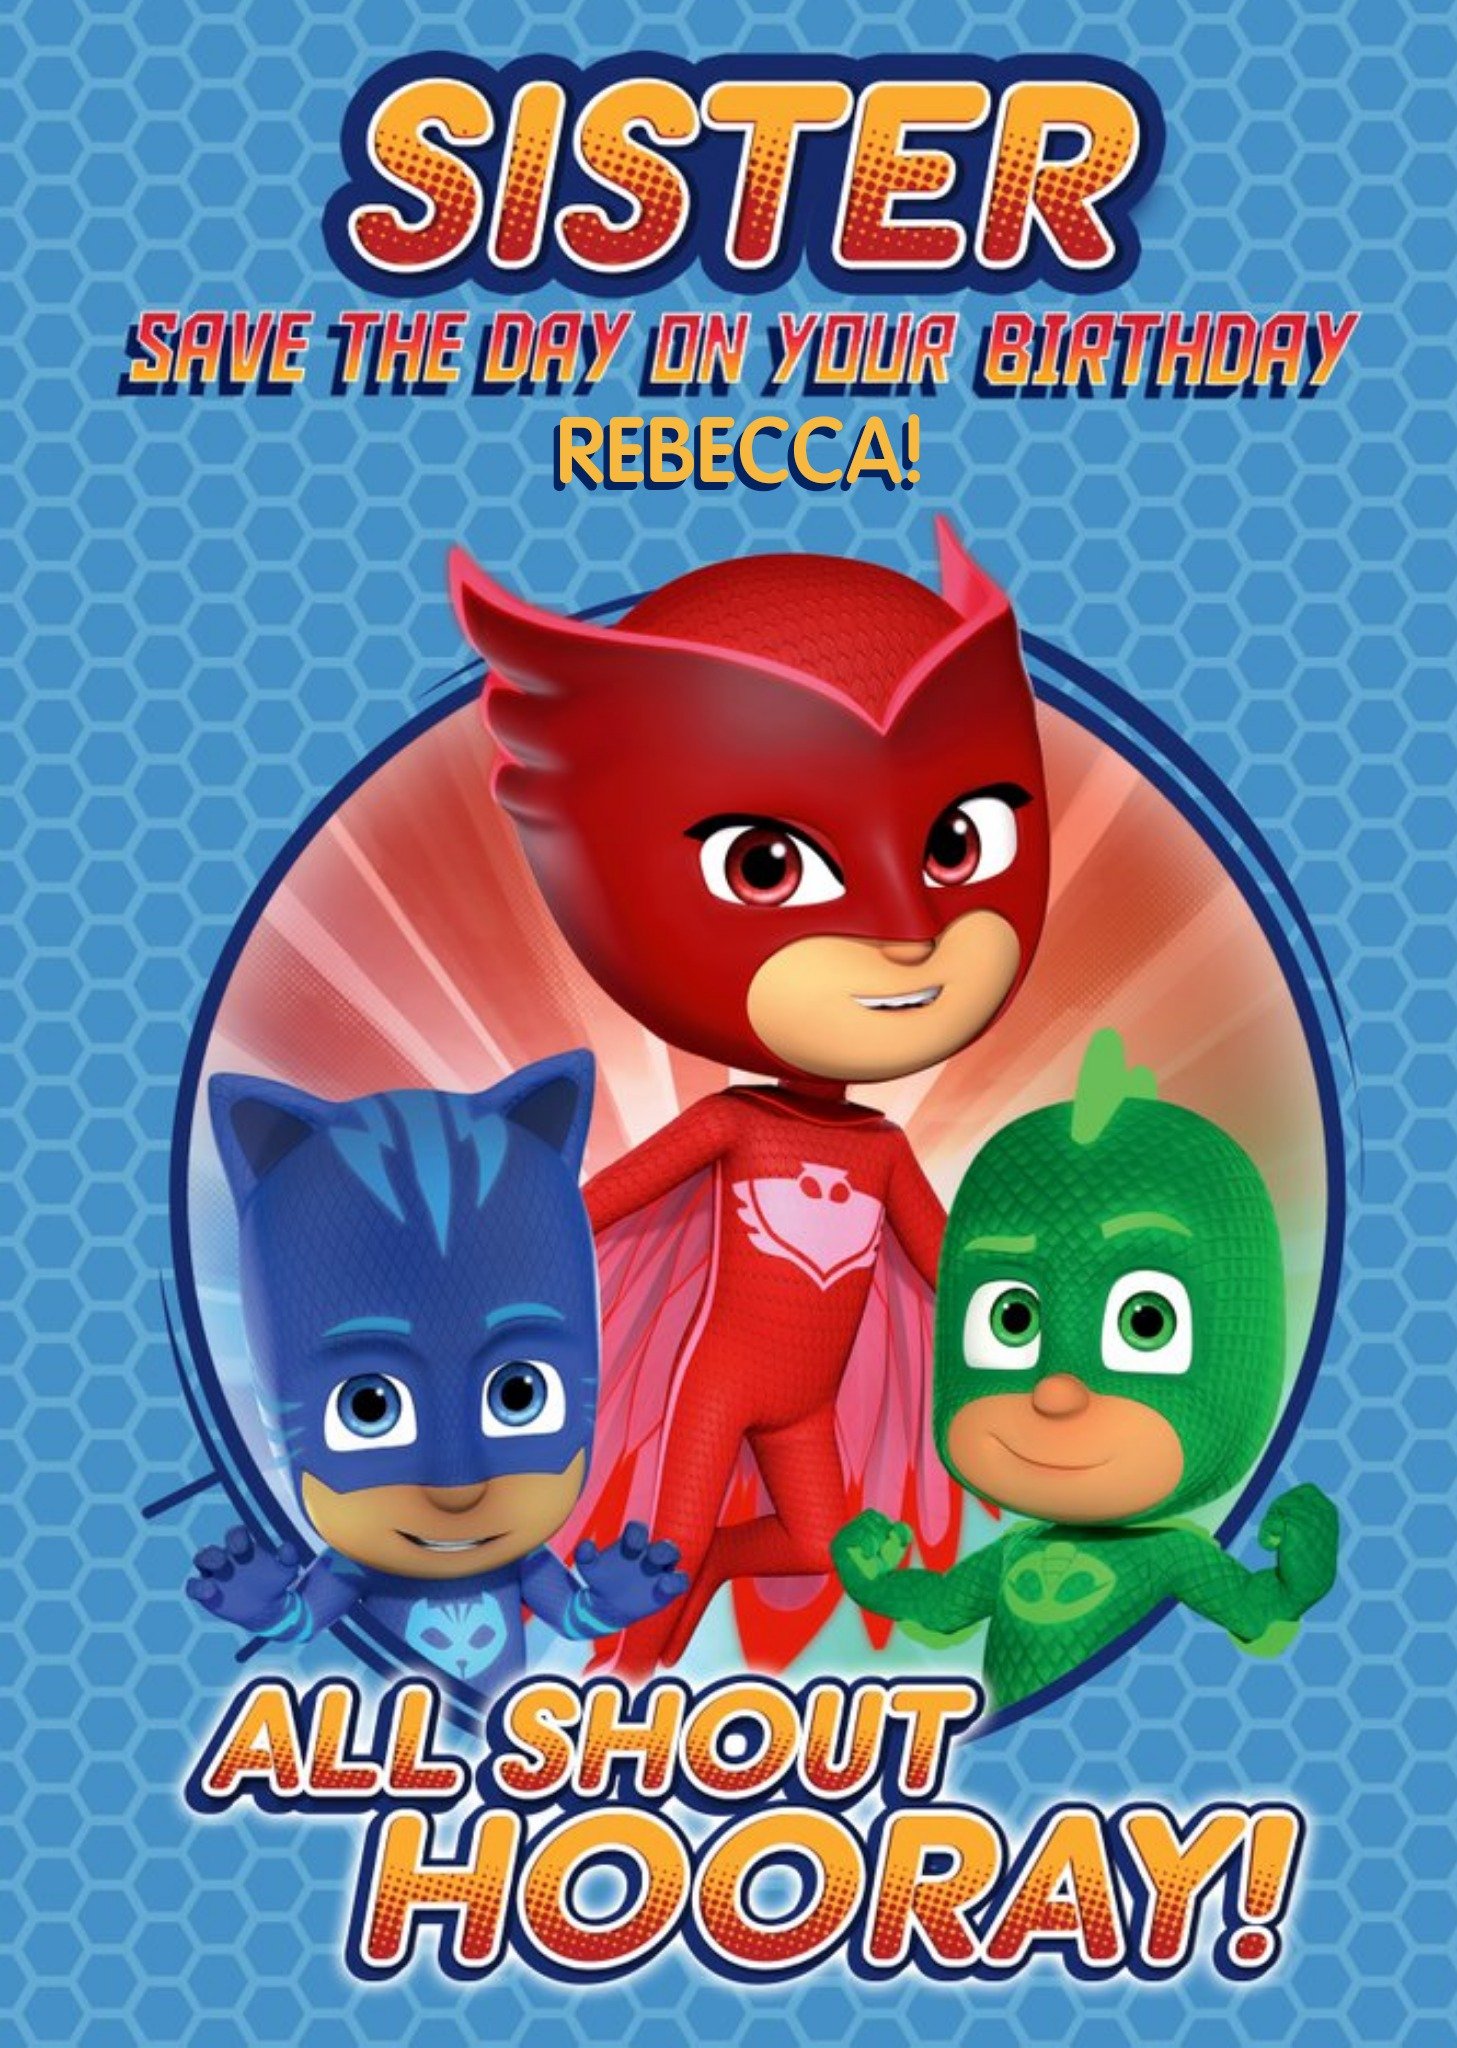 Pj Masks Birthday Card - Sister - Save The Day On Your Birthday, Large